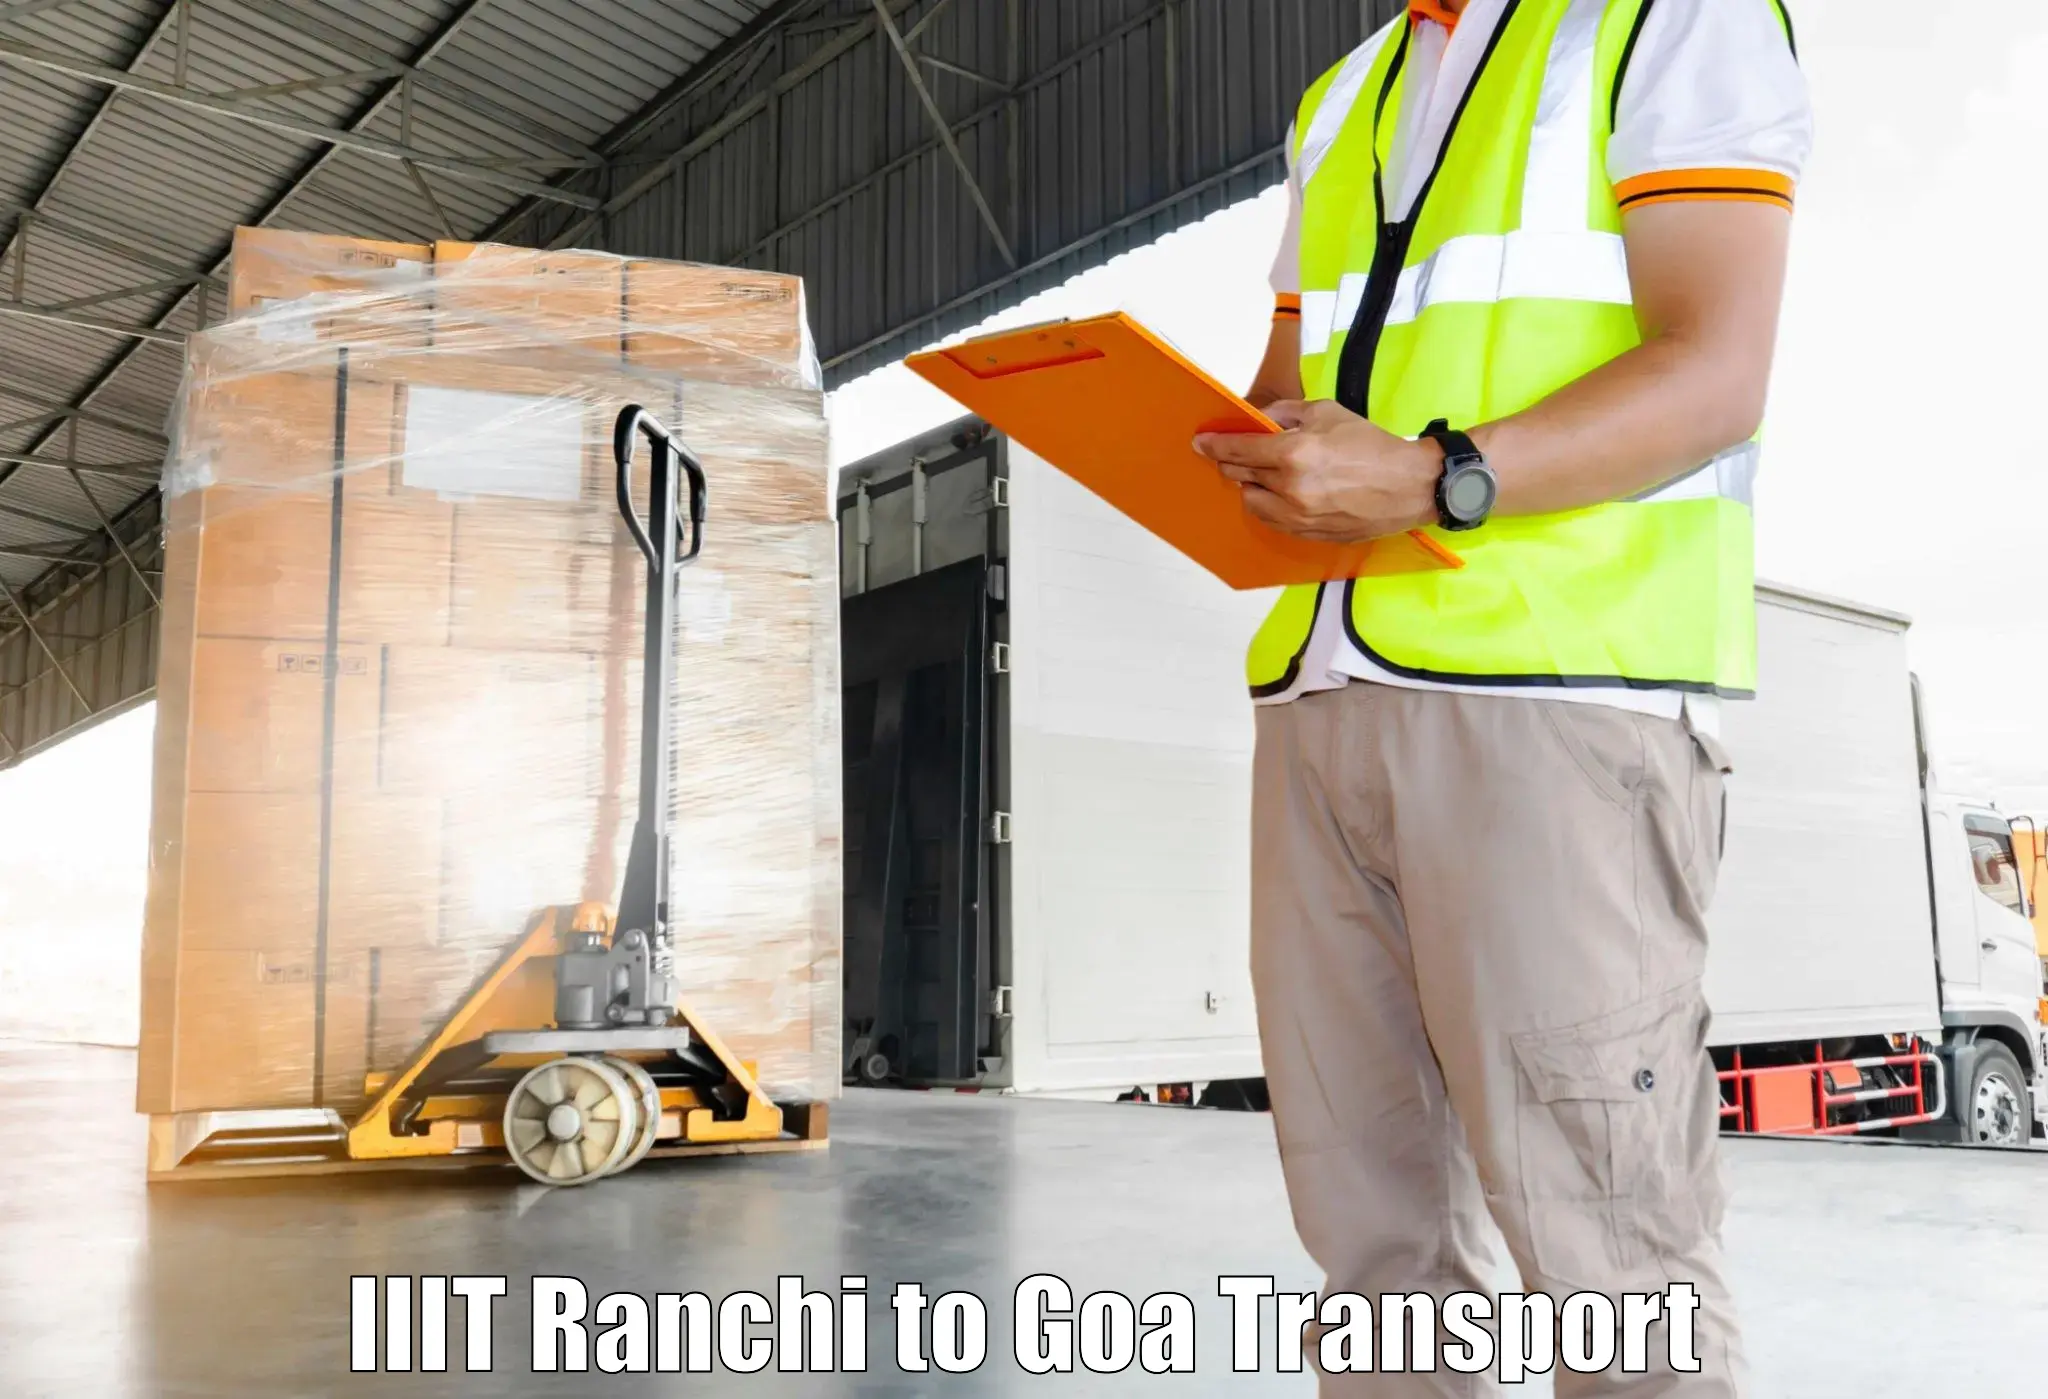 Express transport services IIIT Ranchi to Goa